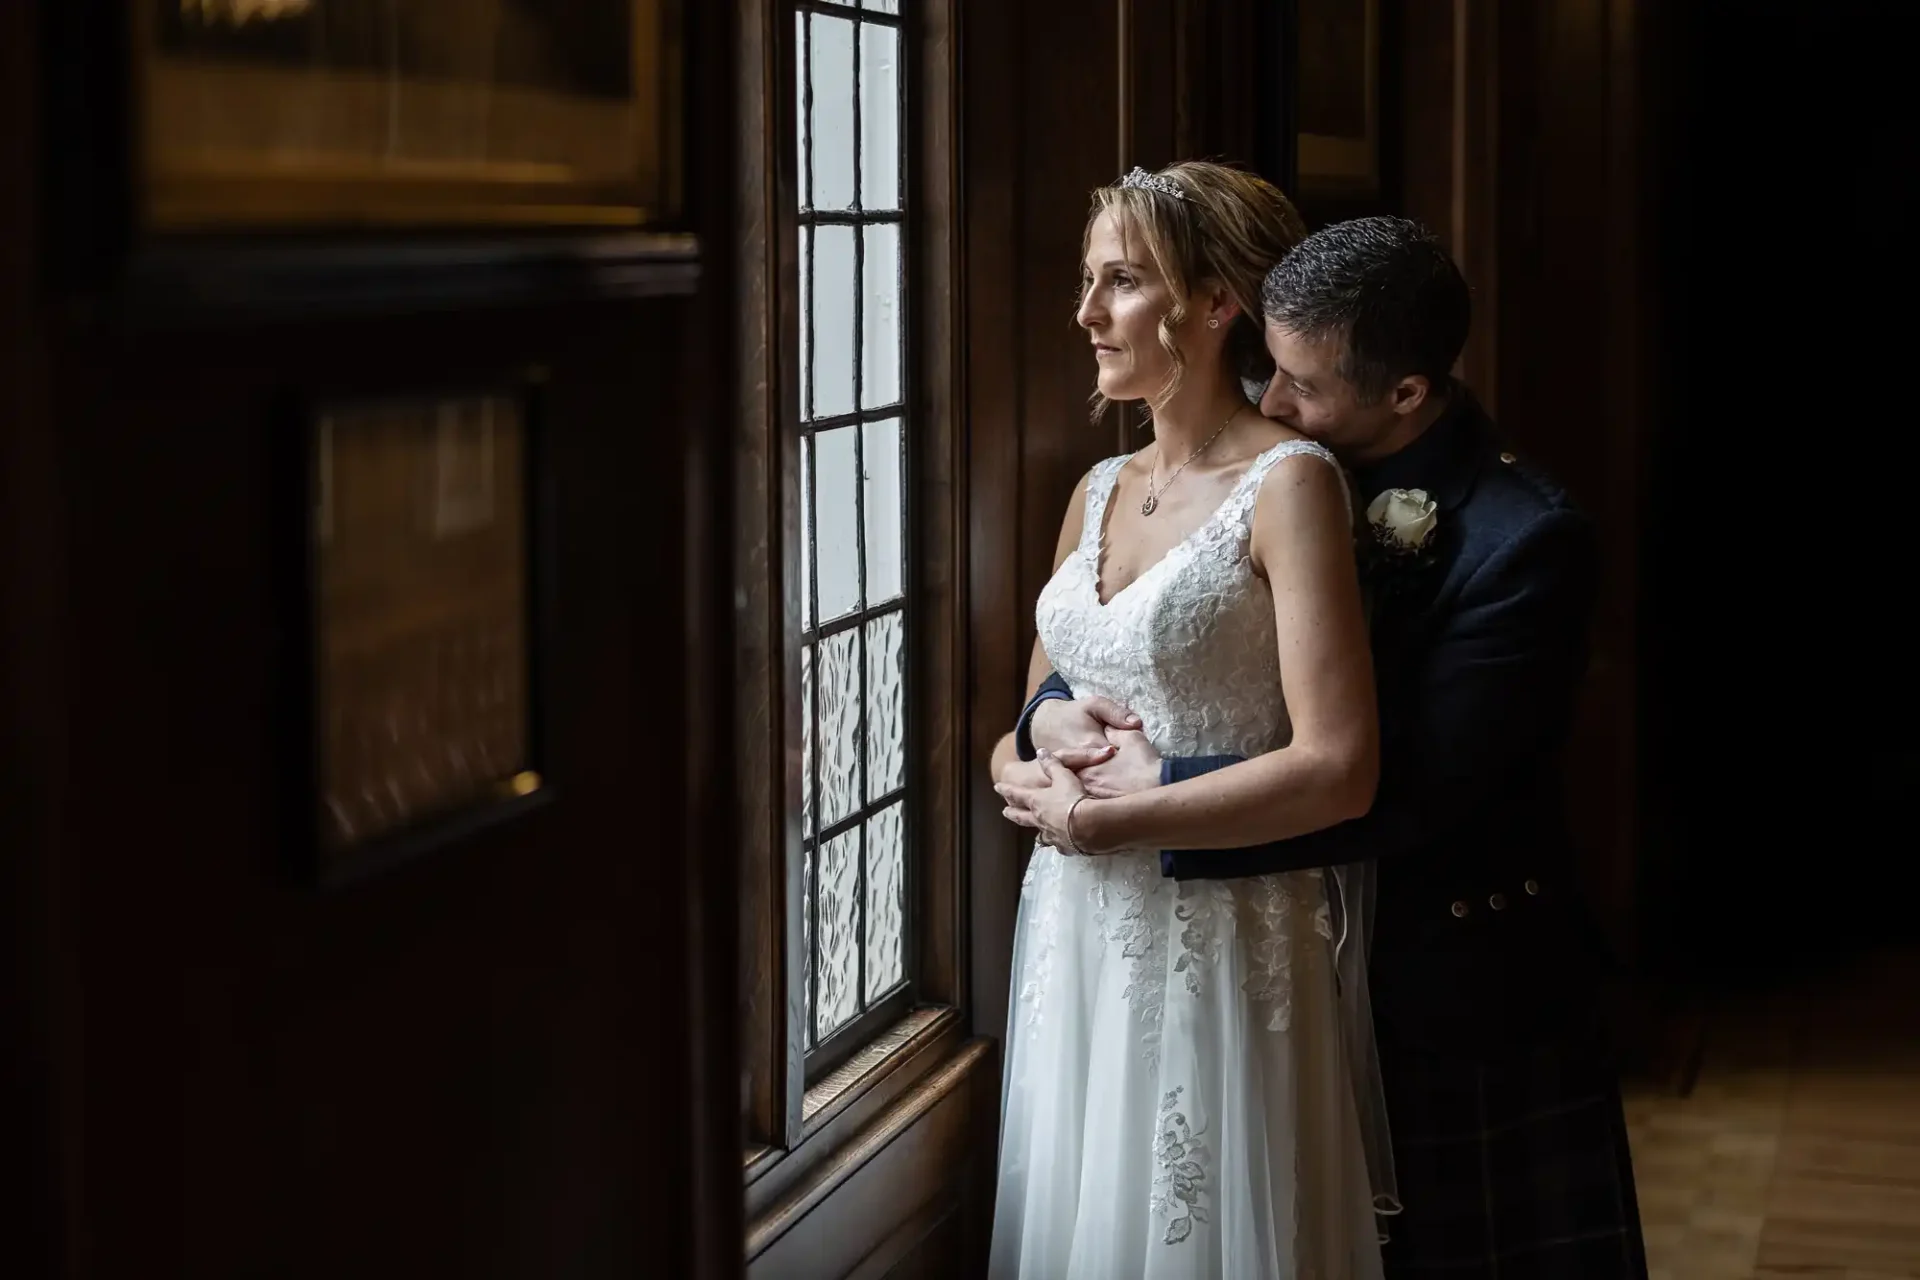 Royal College of Physicians wedding, where a groom in traditional attire embraces a bride in a white dress as they stand by a window.